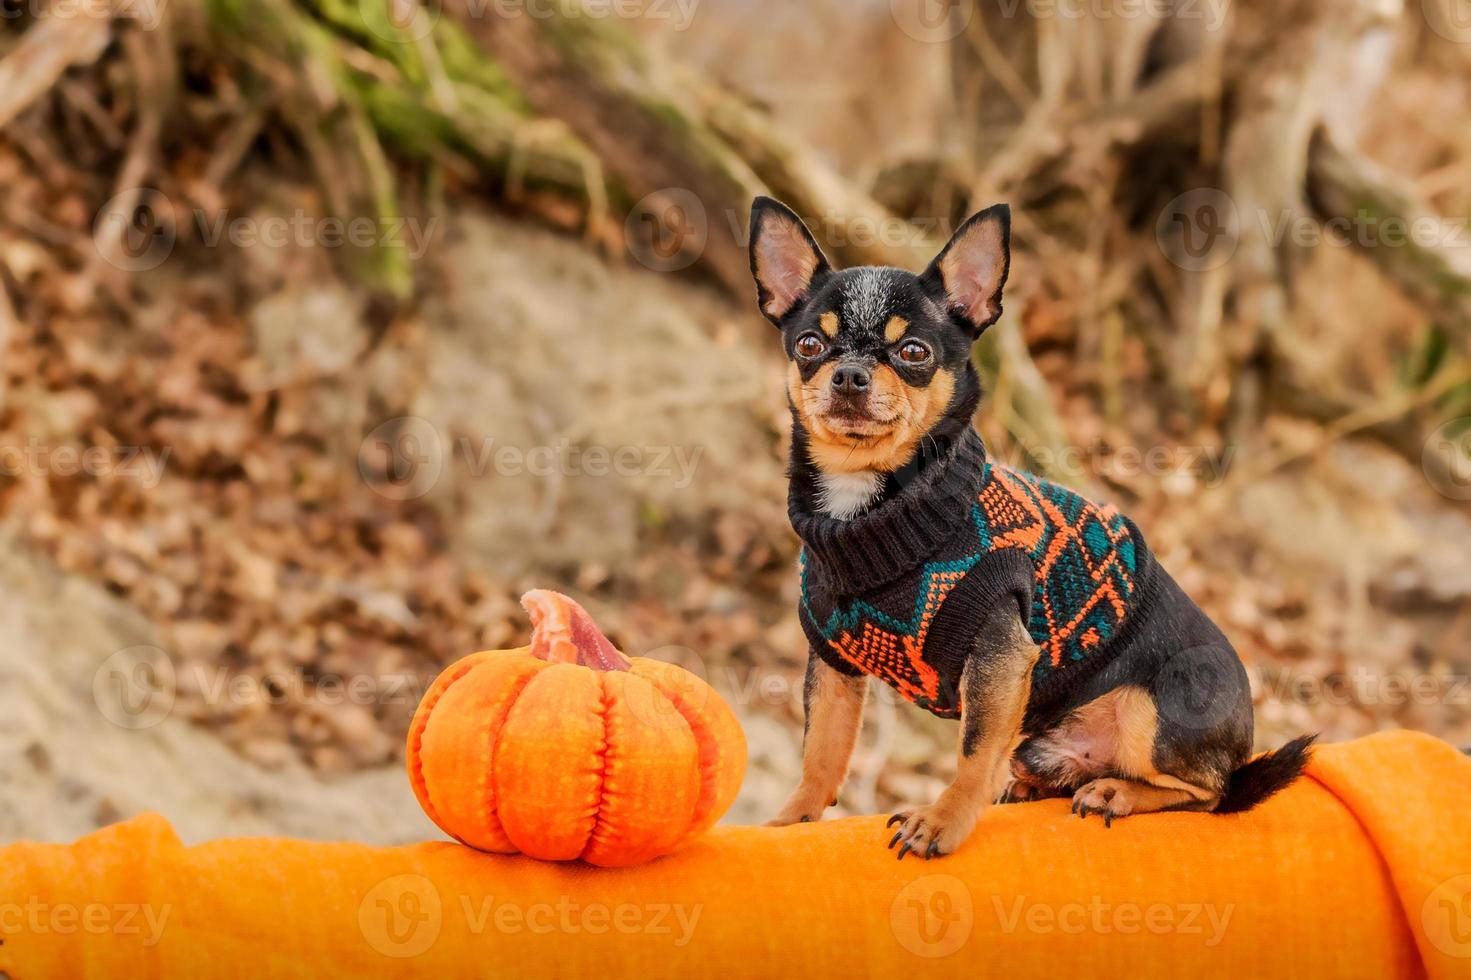 Halloween and chihuahuas concept. Portrait of cute short hair Chihuahua dog with Halloween pumpkin. photo